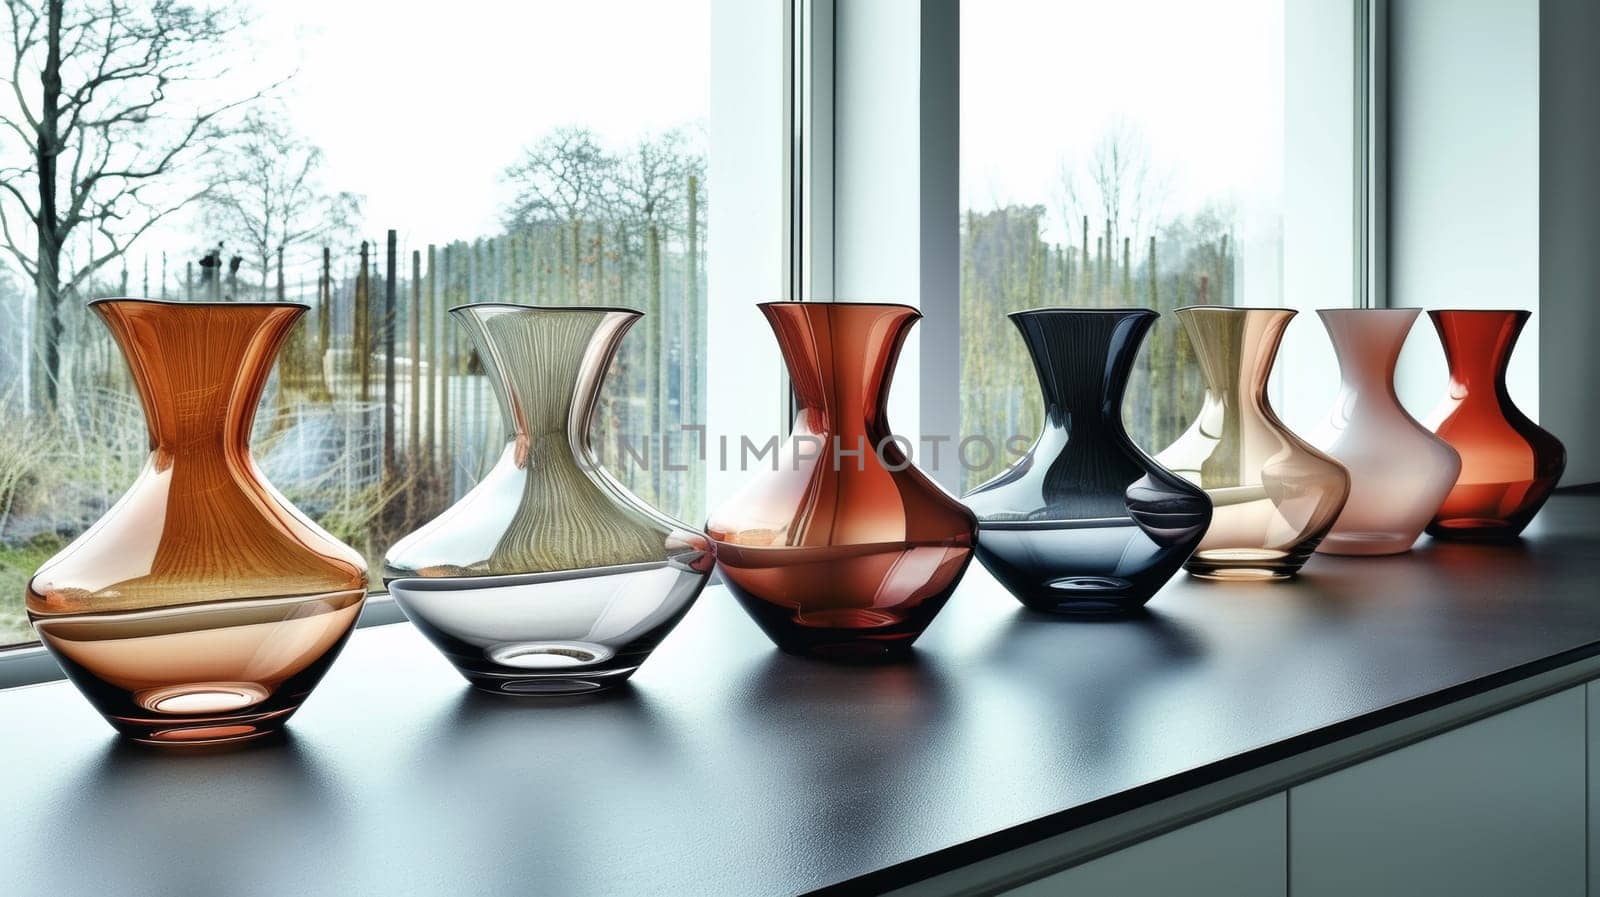 A row of vases lined up on a counter by the window